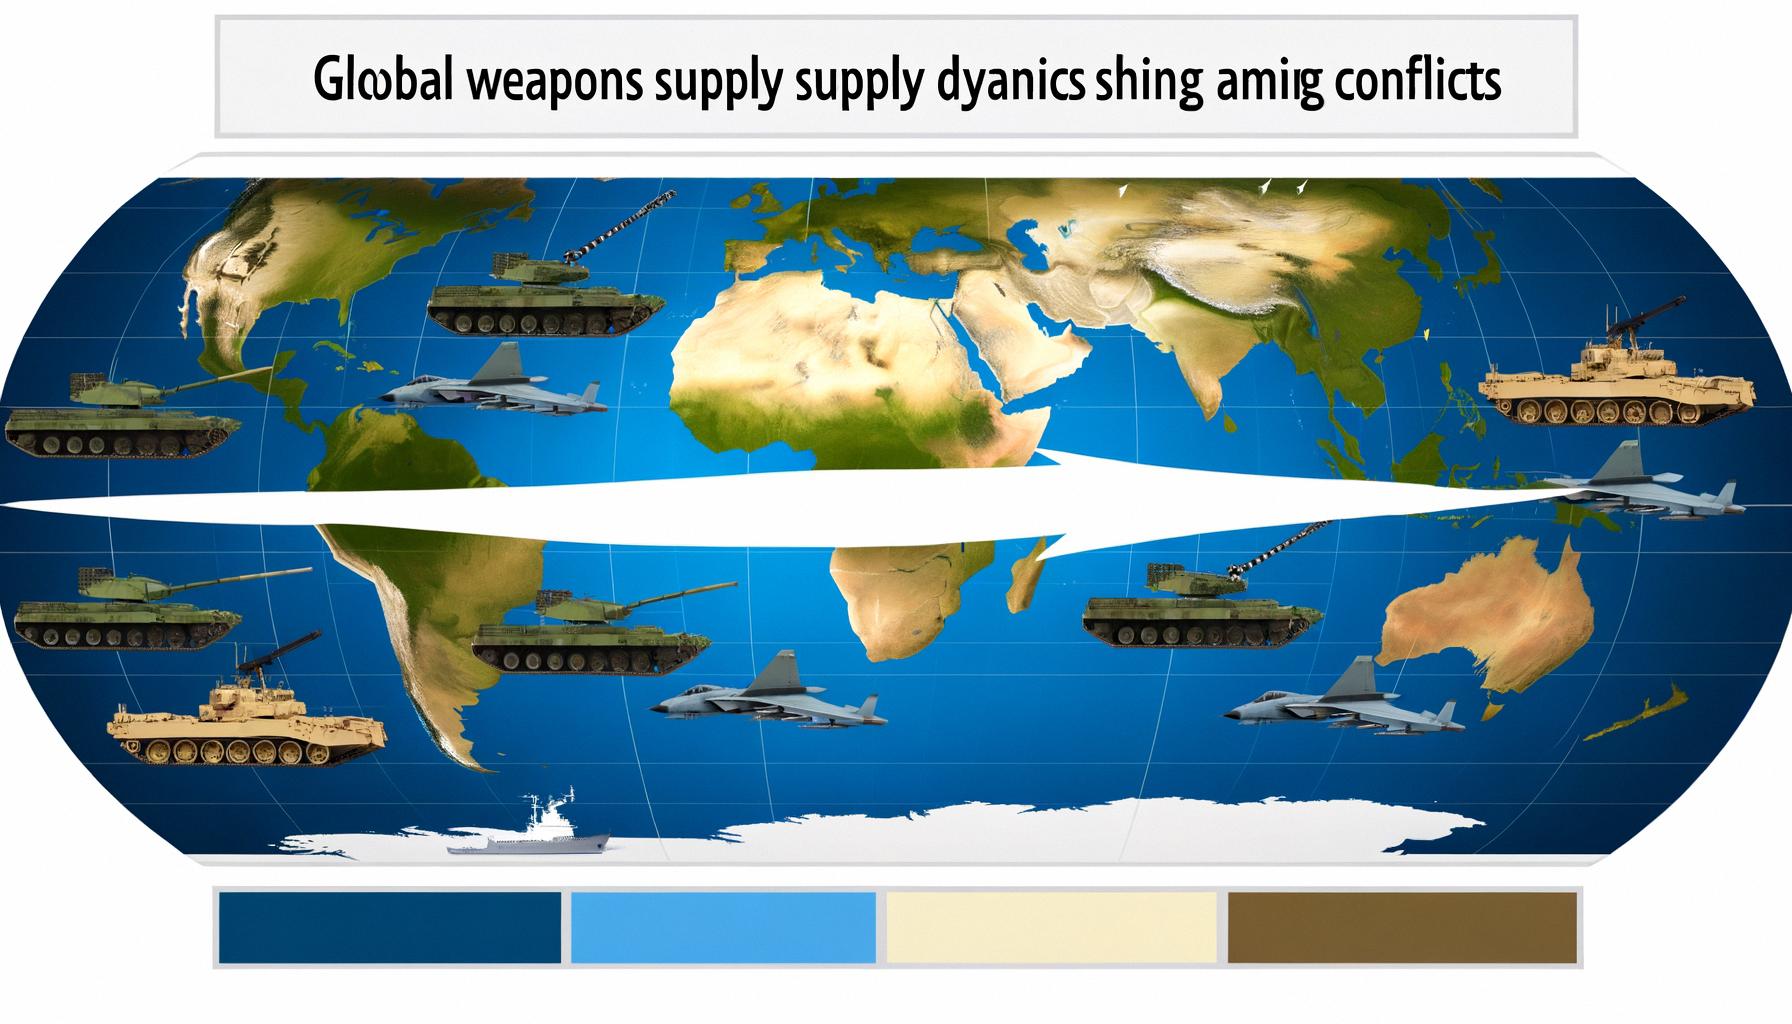 Shifts in global arms supplies impact conflicts and international relations.